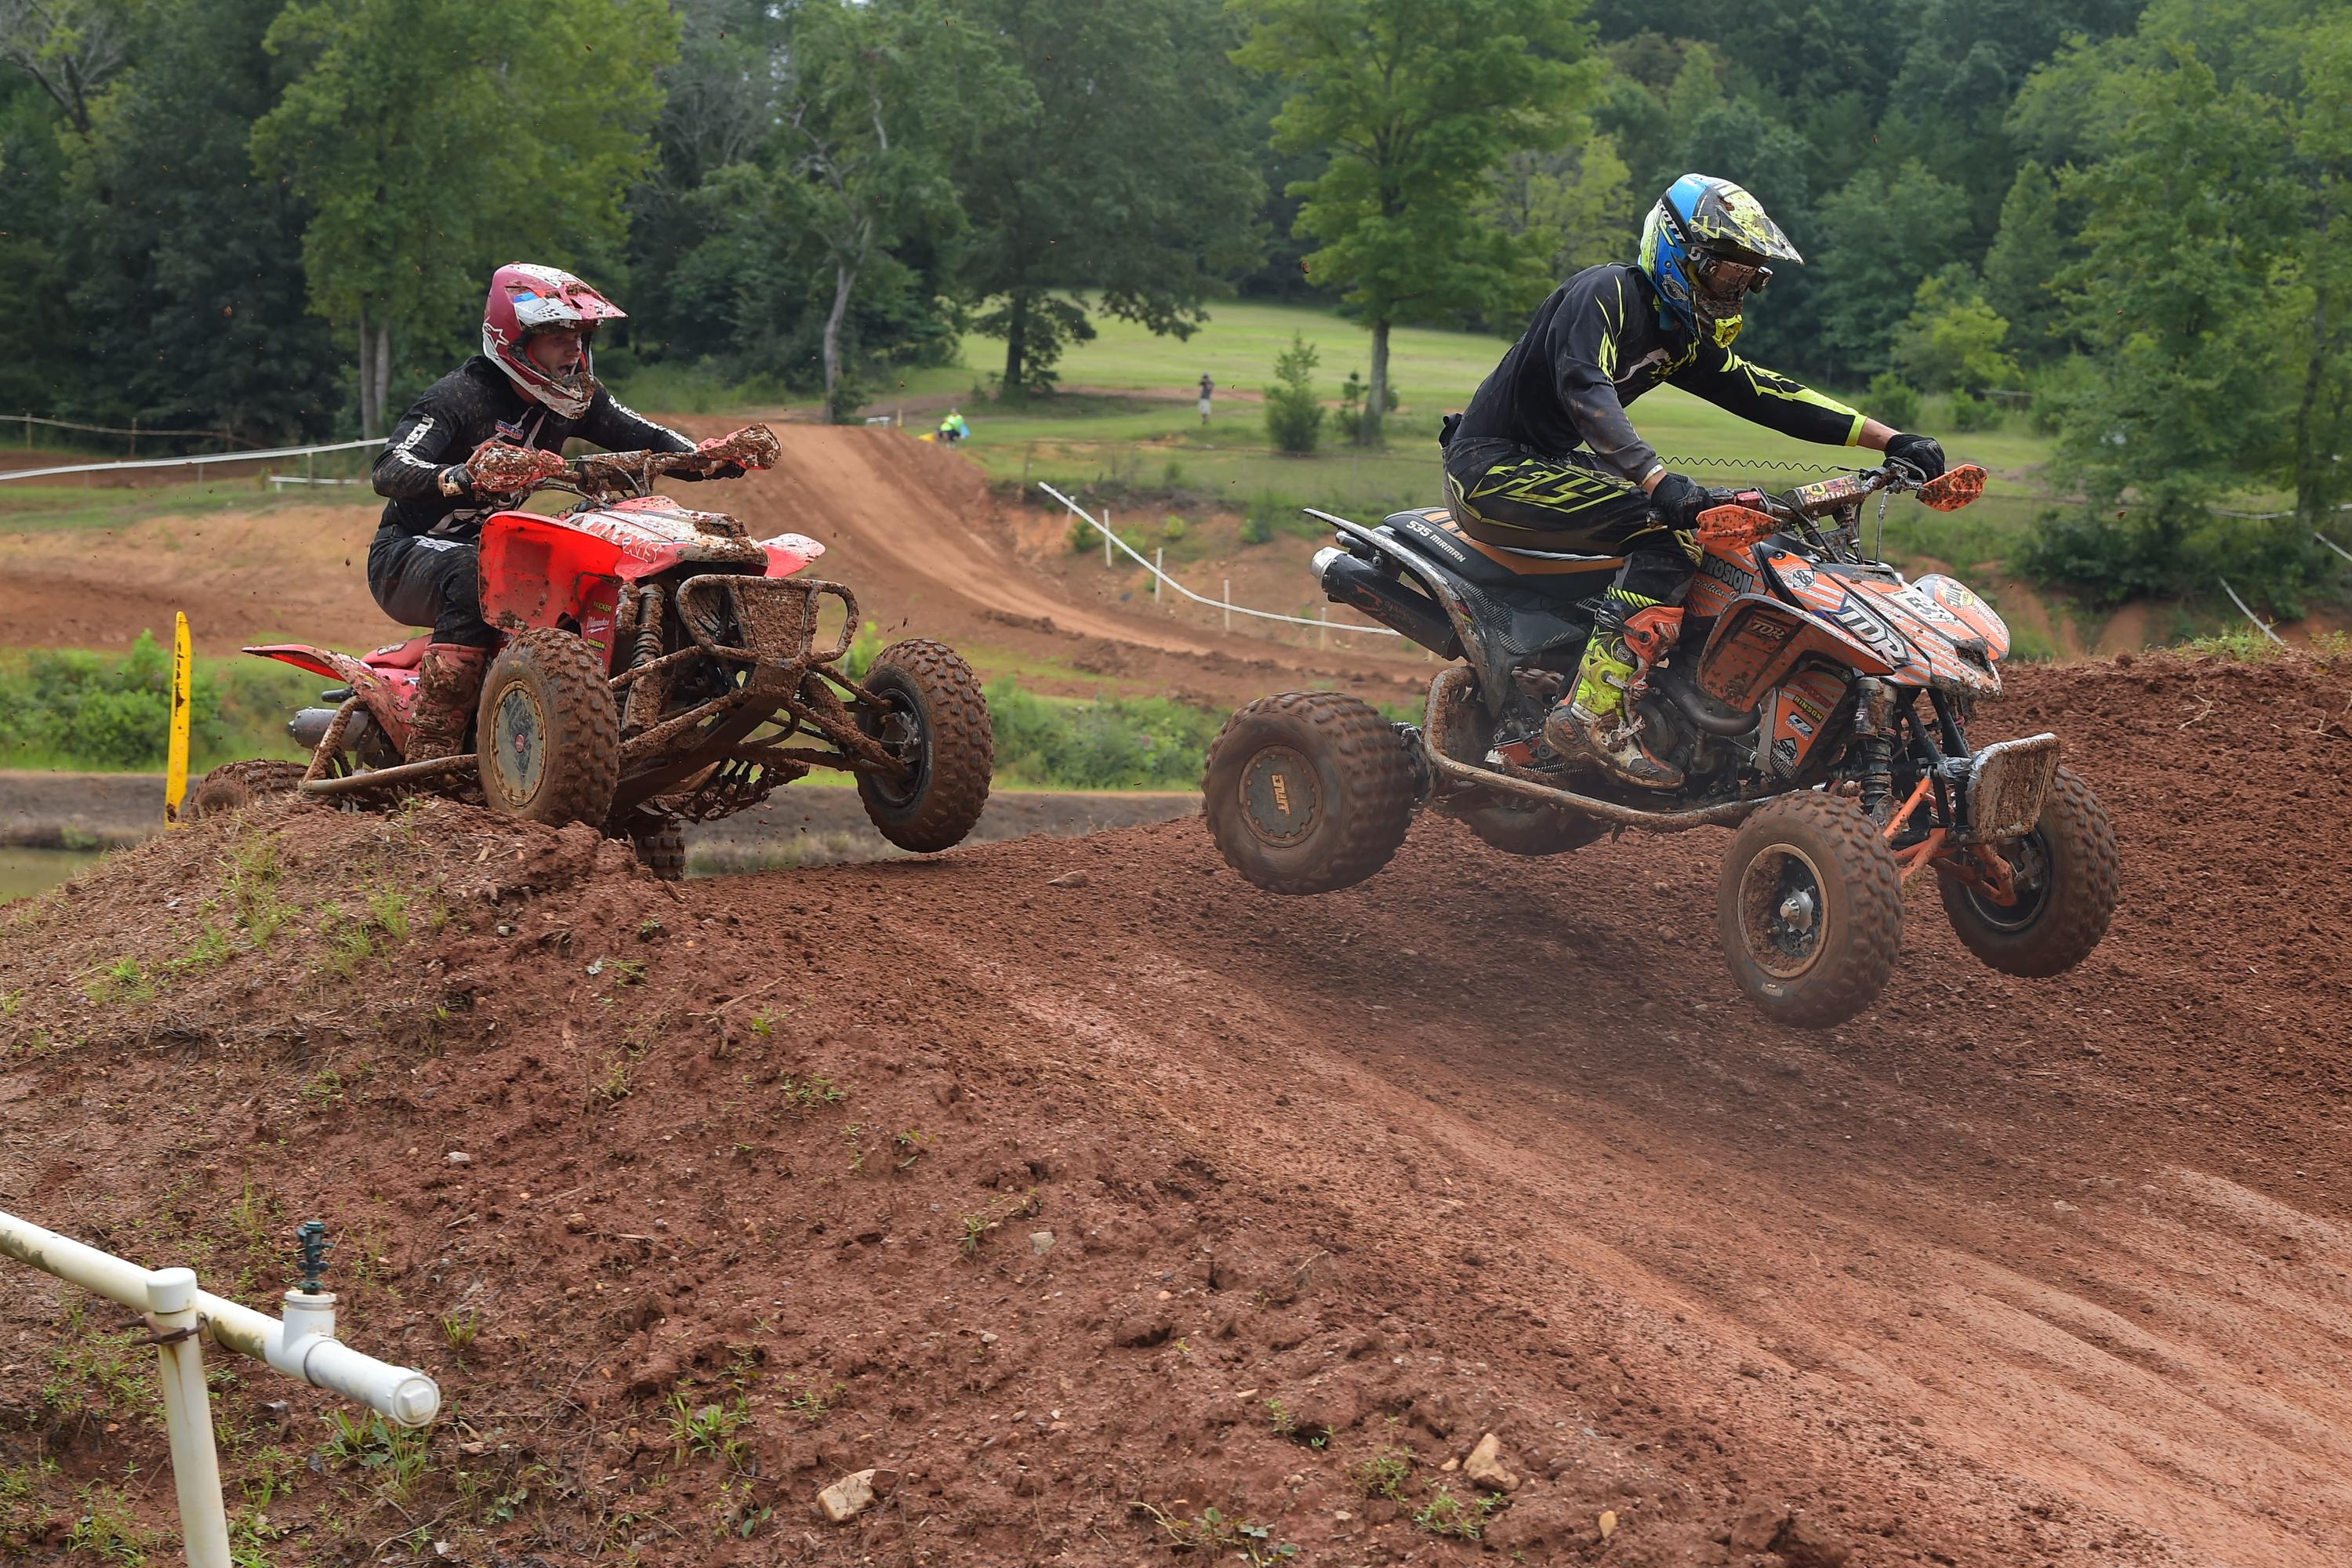 Competition Bulletin 2020-9: Request for Proposals: Rules/Class Changes for the 2021 ATV Motocross Season